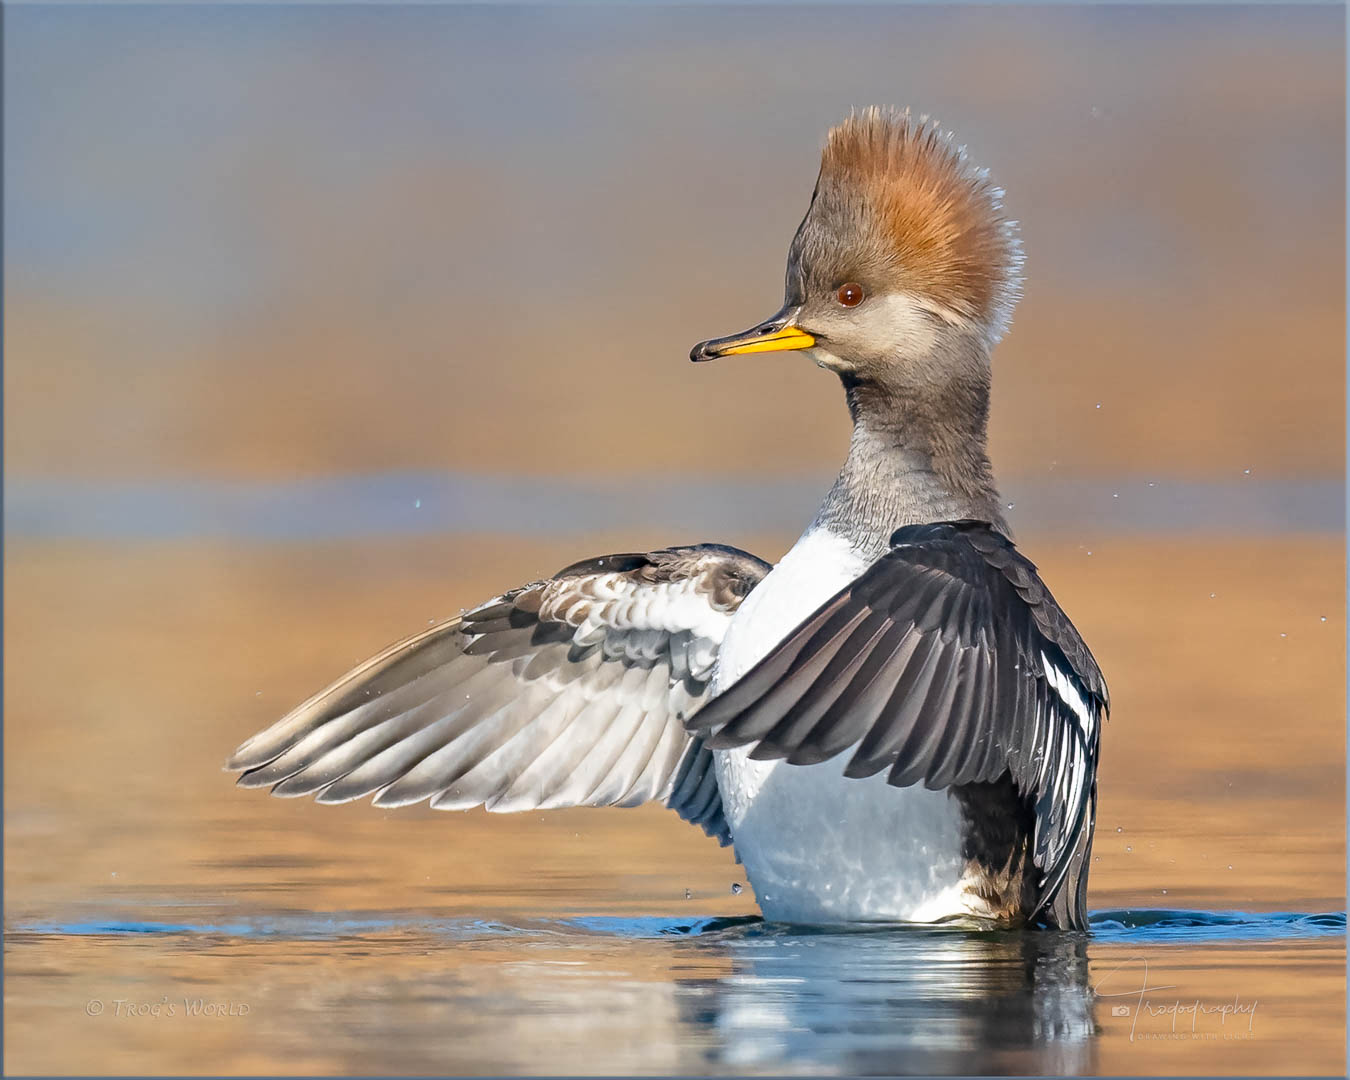 A female Hooded Merganser practicing her conductor skills